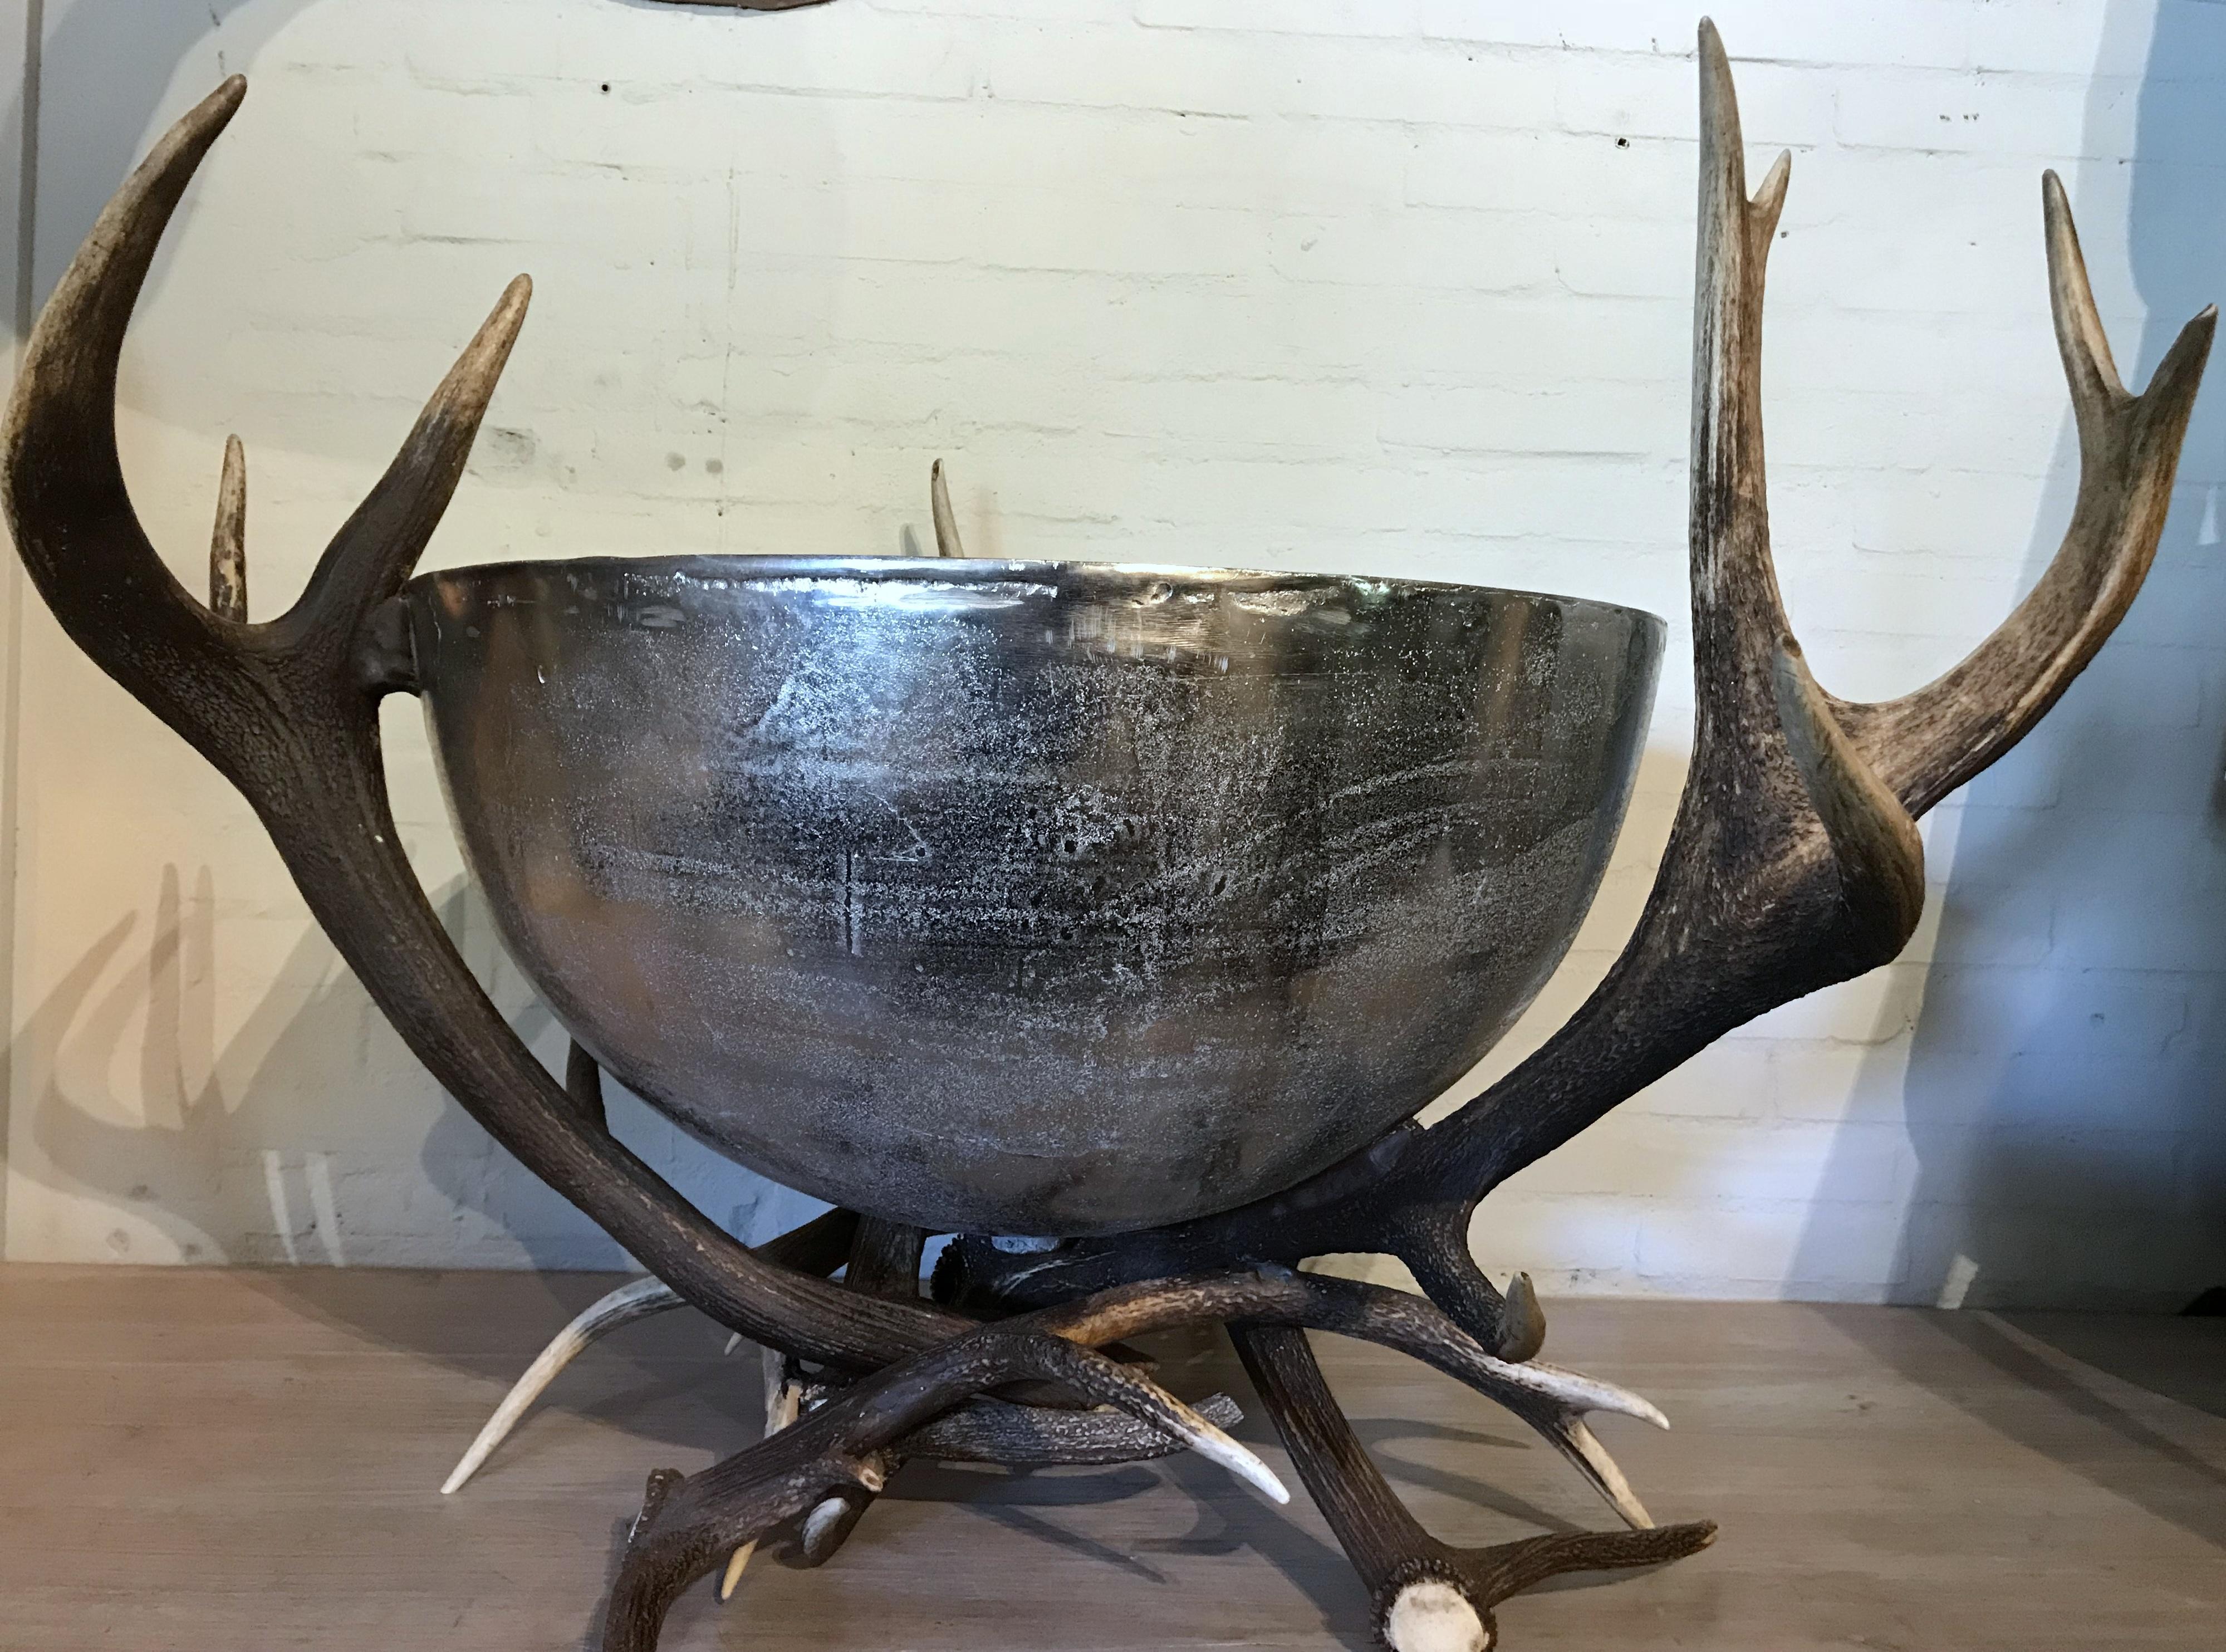 Gigantic champagne cooler made of red deer antler. The bowl is made of robust nickel-plated metal.
Very decorative piece to fill up with ice and bottles of wine or champagne. The bowl has a diameter of 66 cm.